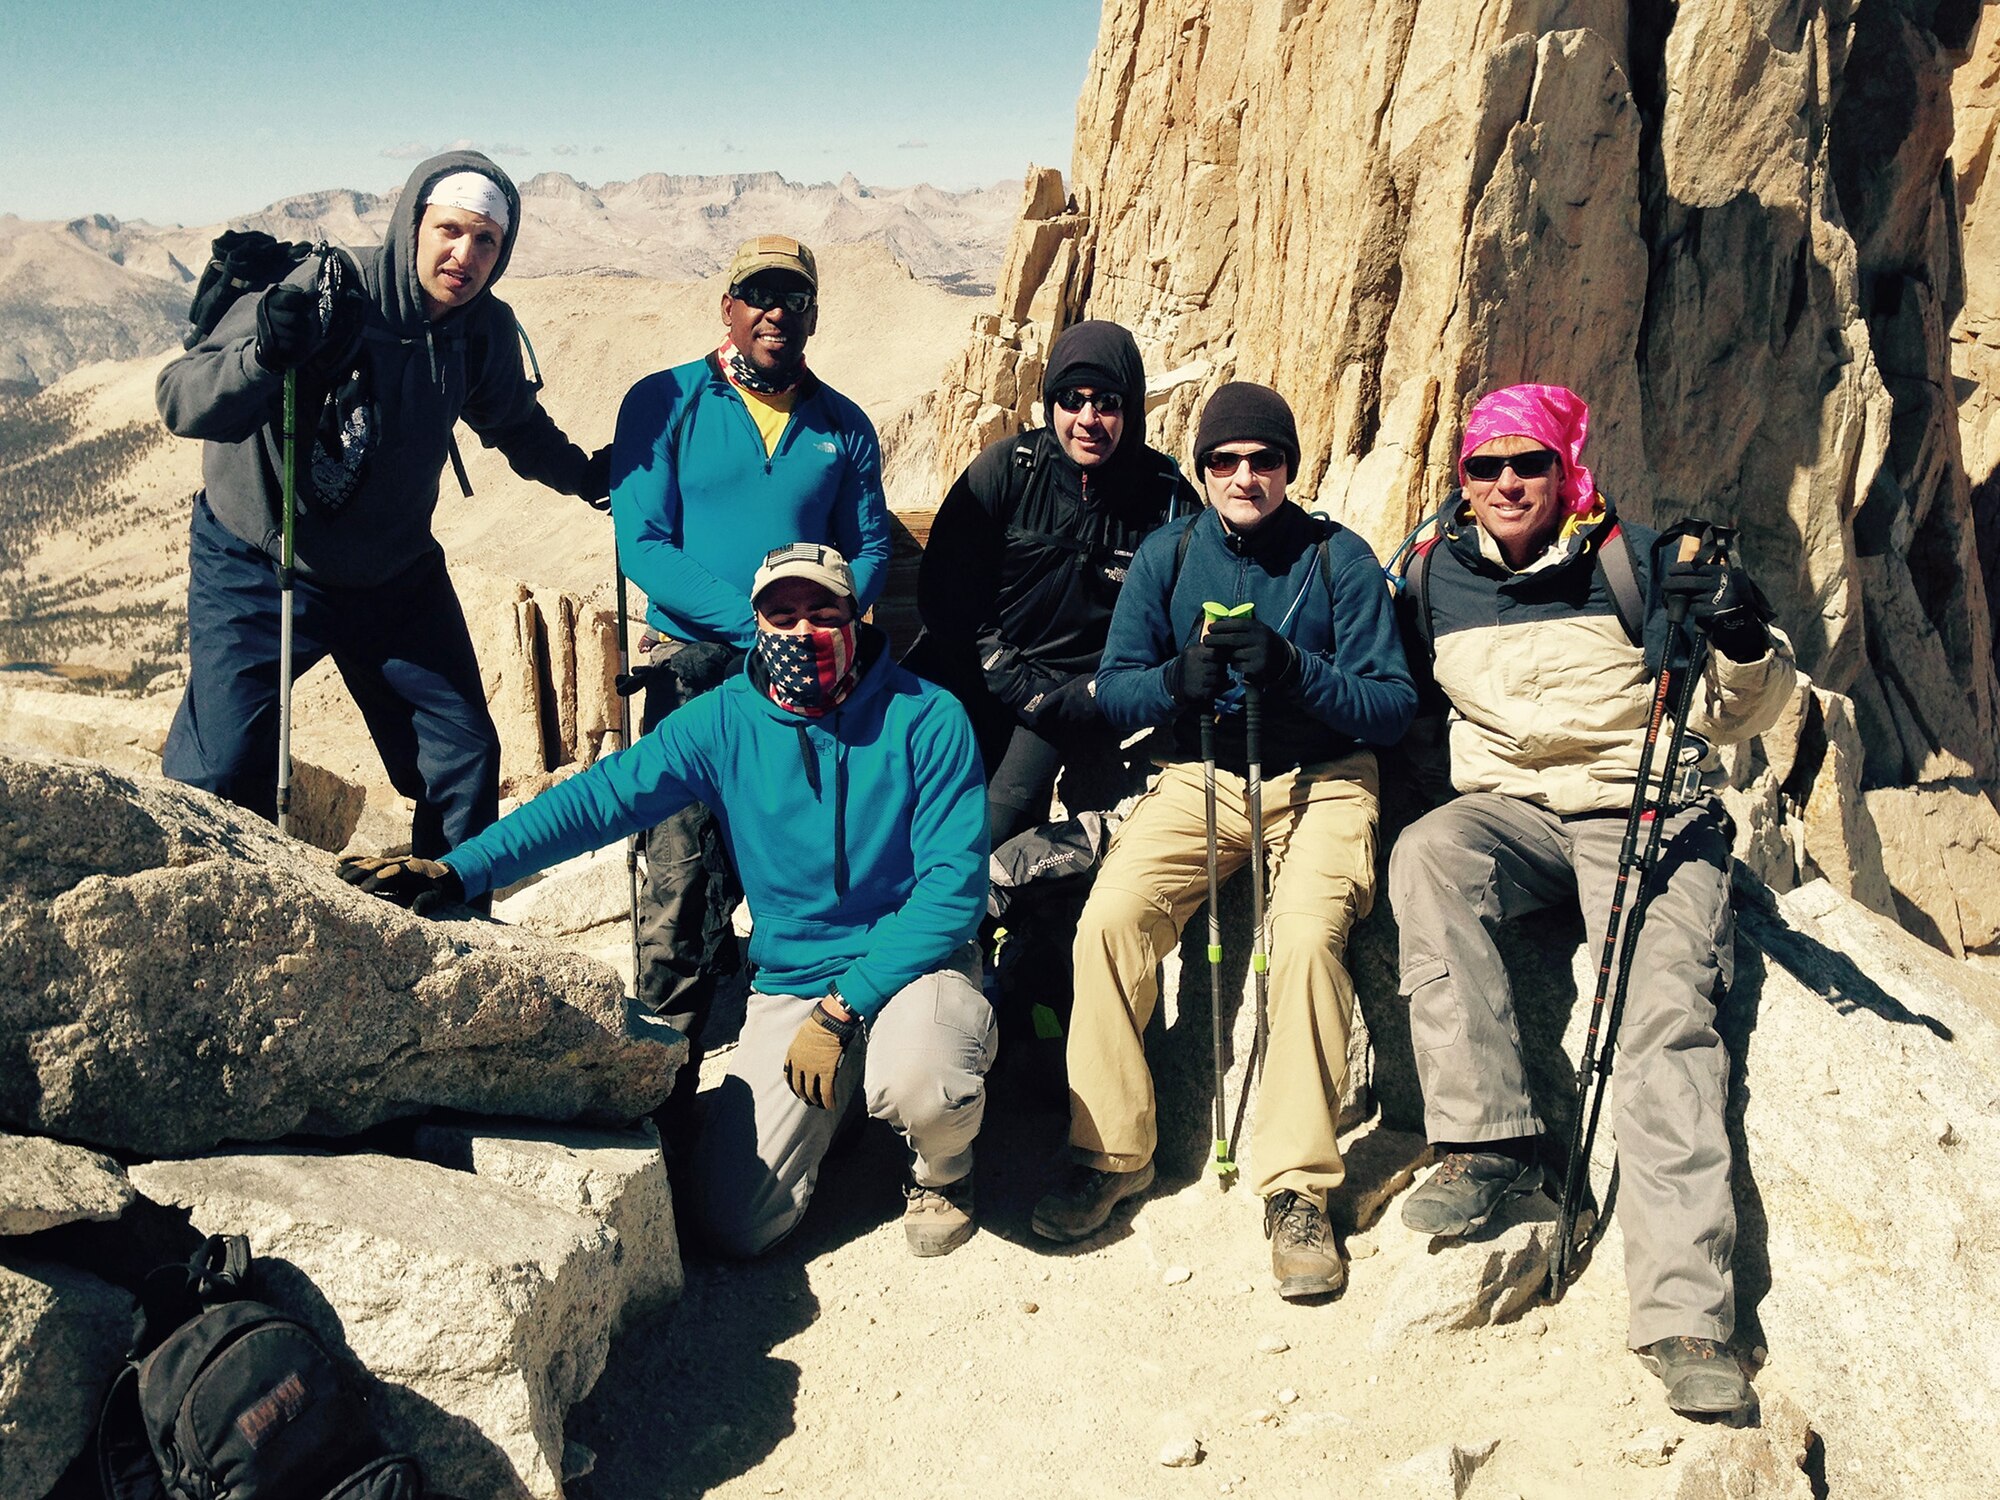 Senior Airman Christian Emery, 30th Security Forces Defender, and his hiking group during their trip to the summit of Mt. Whitney, Oct. 3, 2015. Emery unexpectedly found himself spending the night on Mt. Whitney as he provided emergency aid to hikers in distress. (Courtesy Photo)